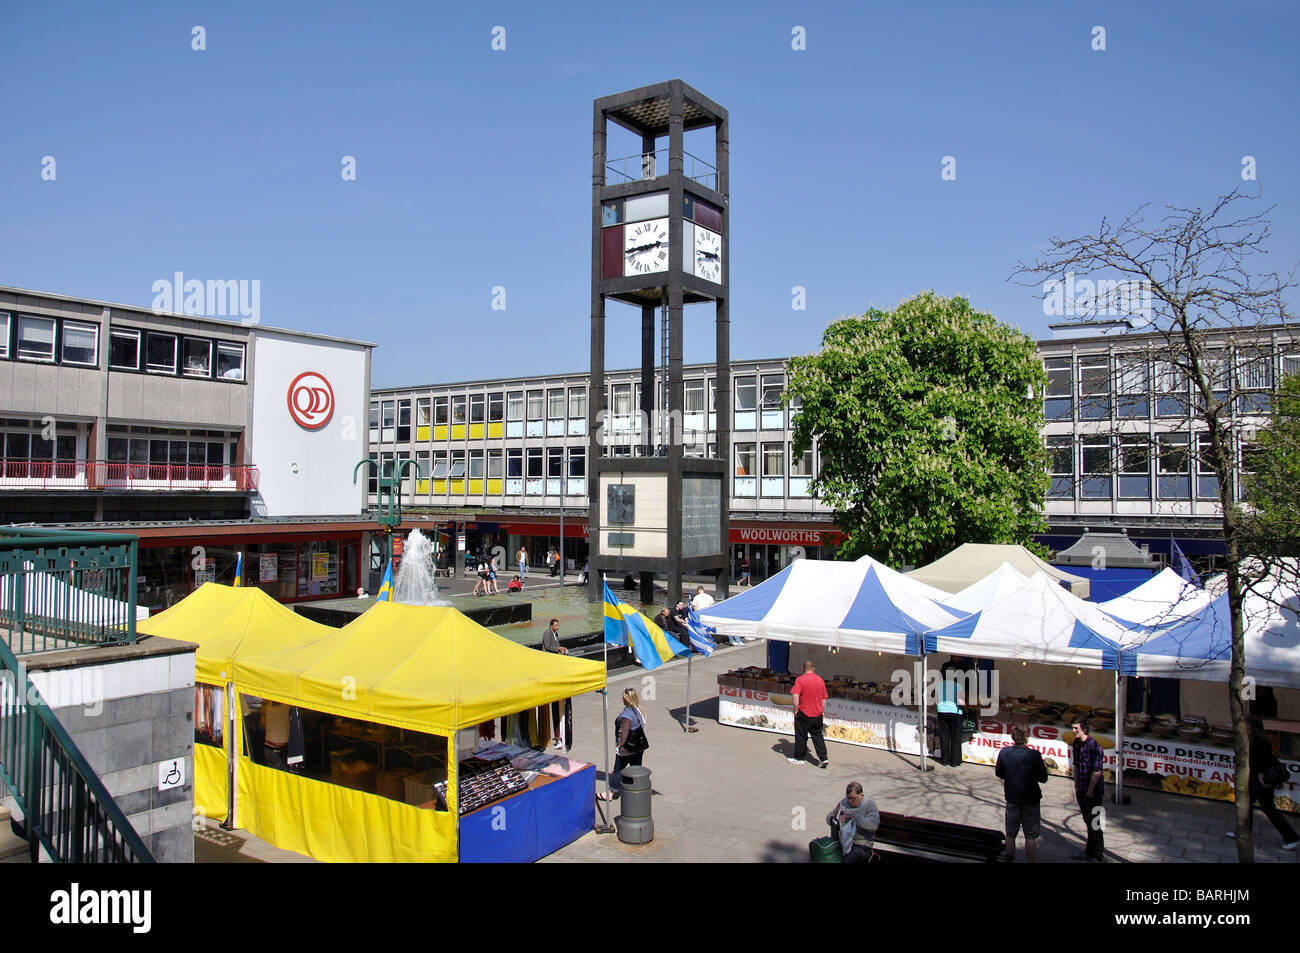 Clock tower and outdoor market, Town Square, Stevenage, Hertfordshire, England, United Kingdom Stock Photo